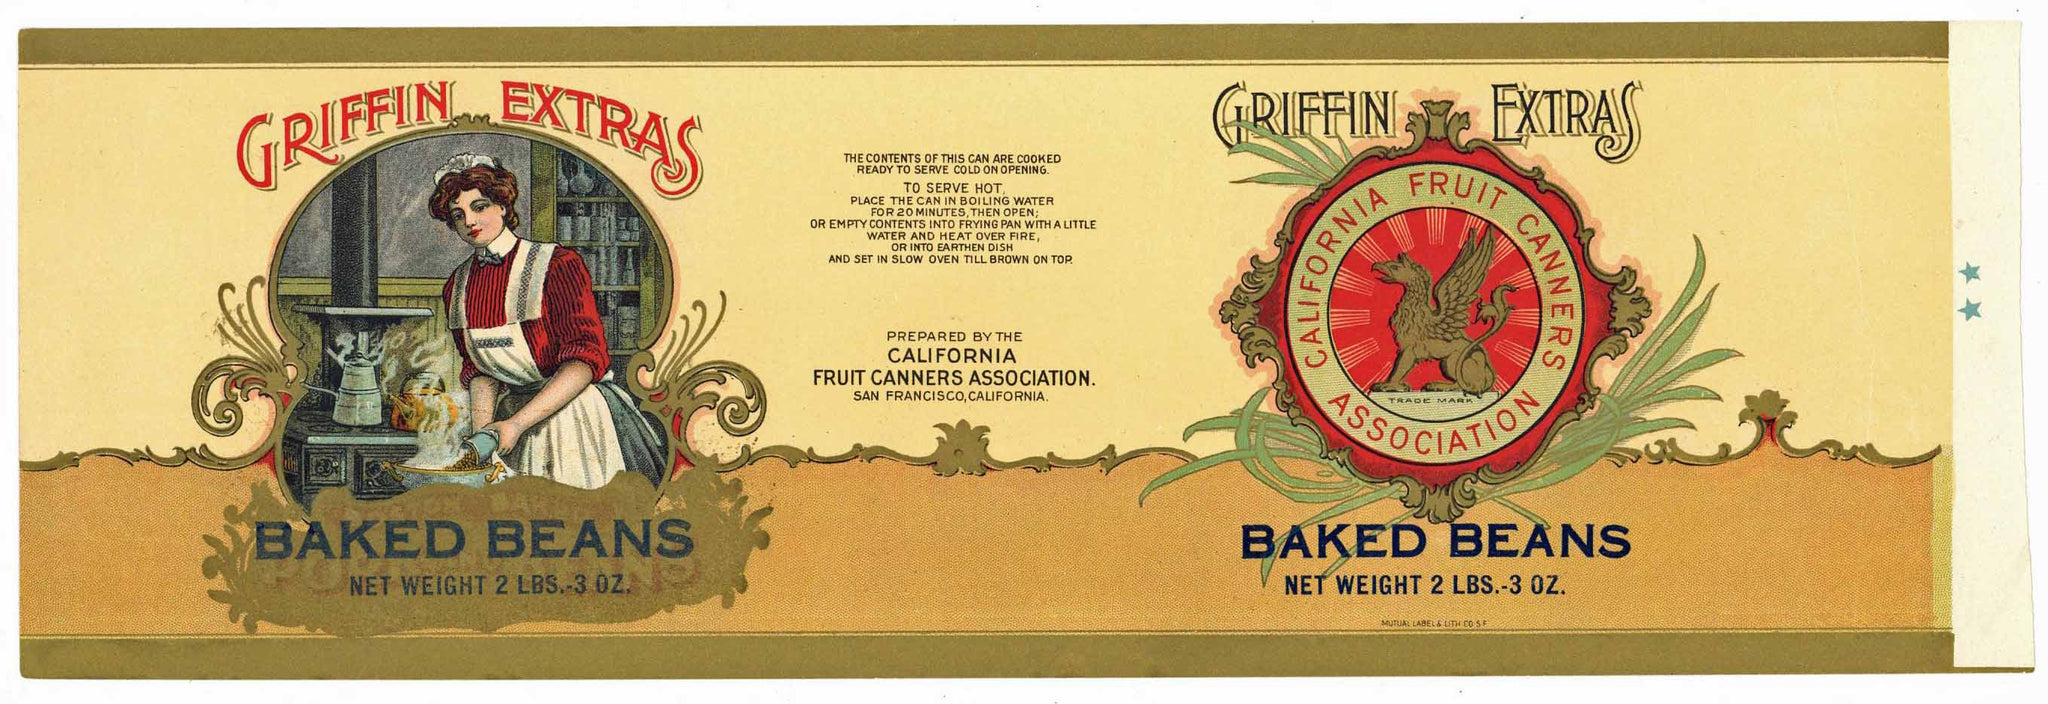 Griffin Extras Brand Vintage Baked Beans Can Label